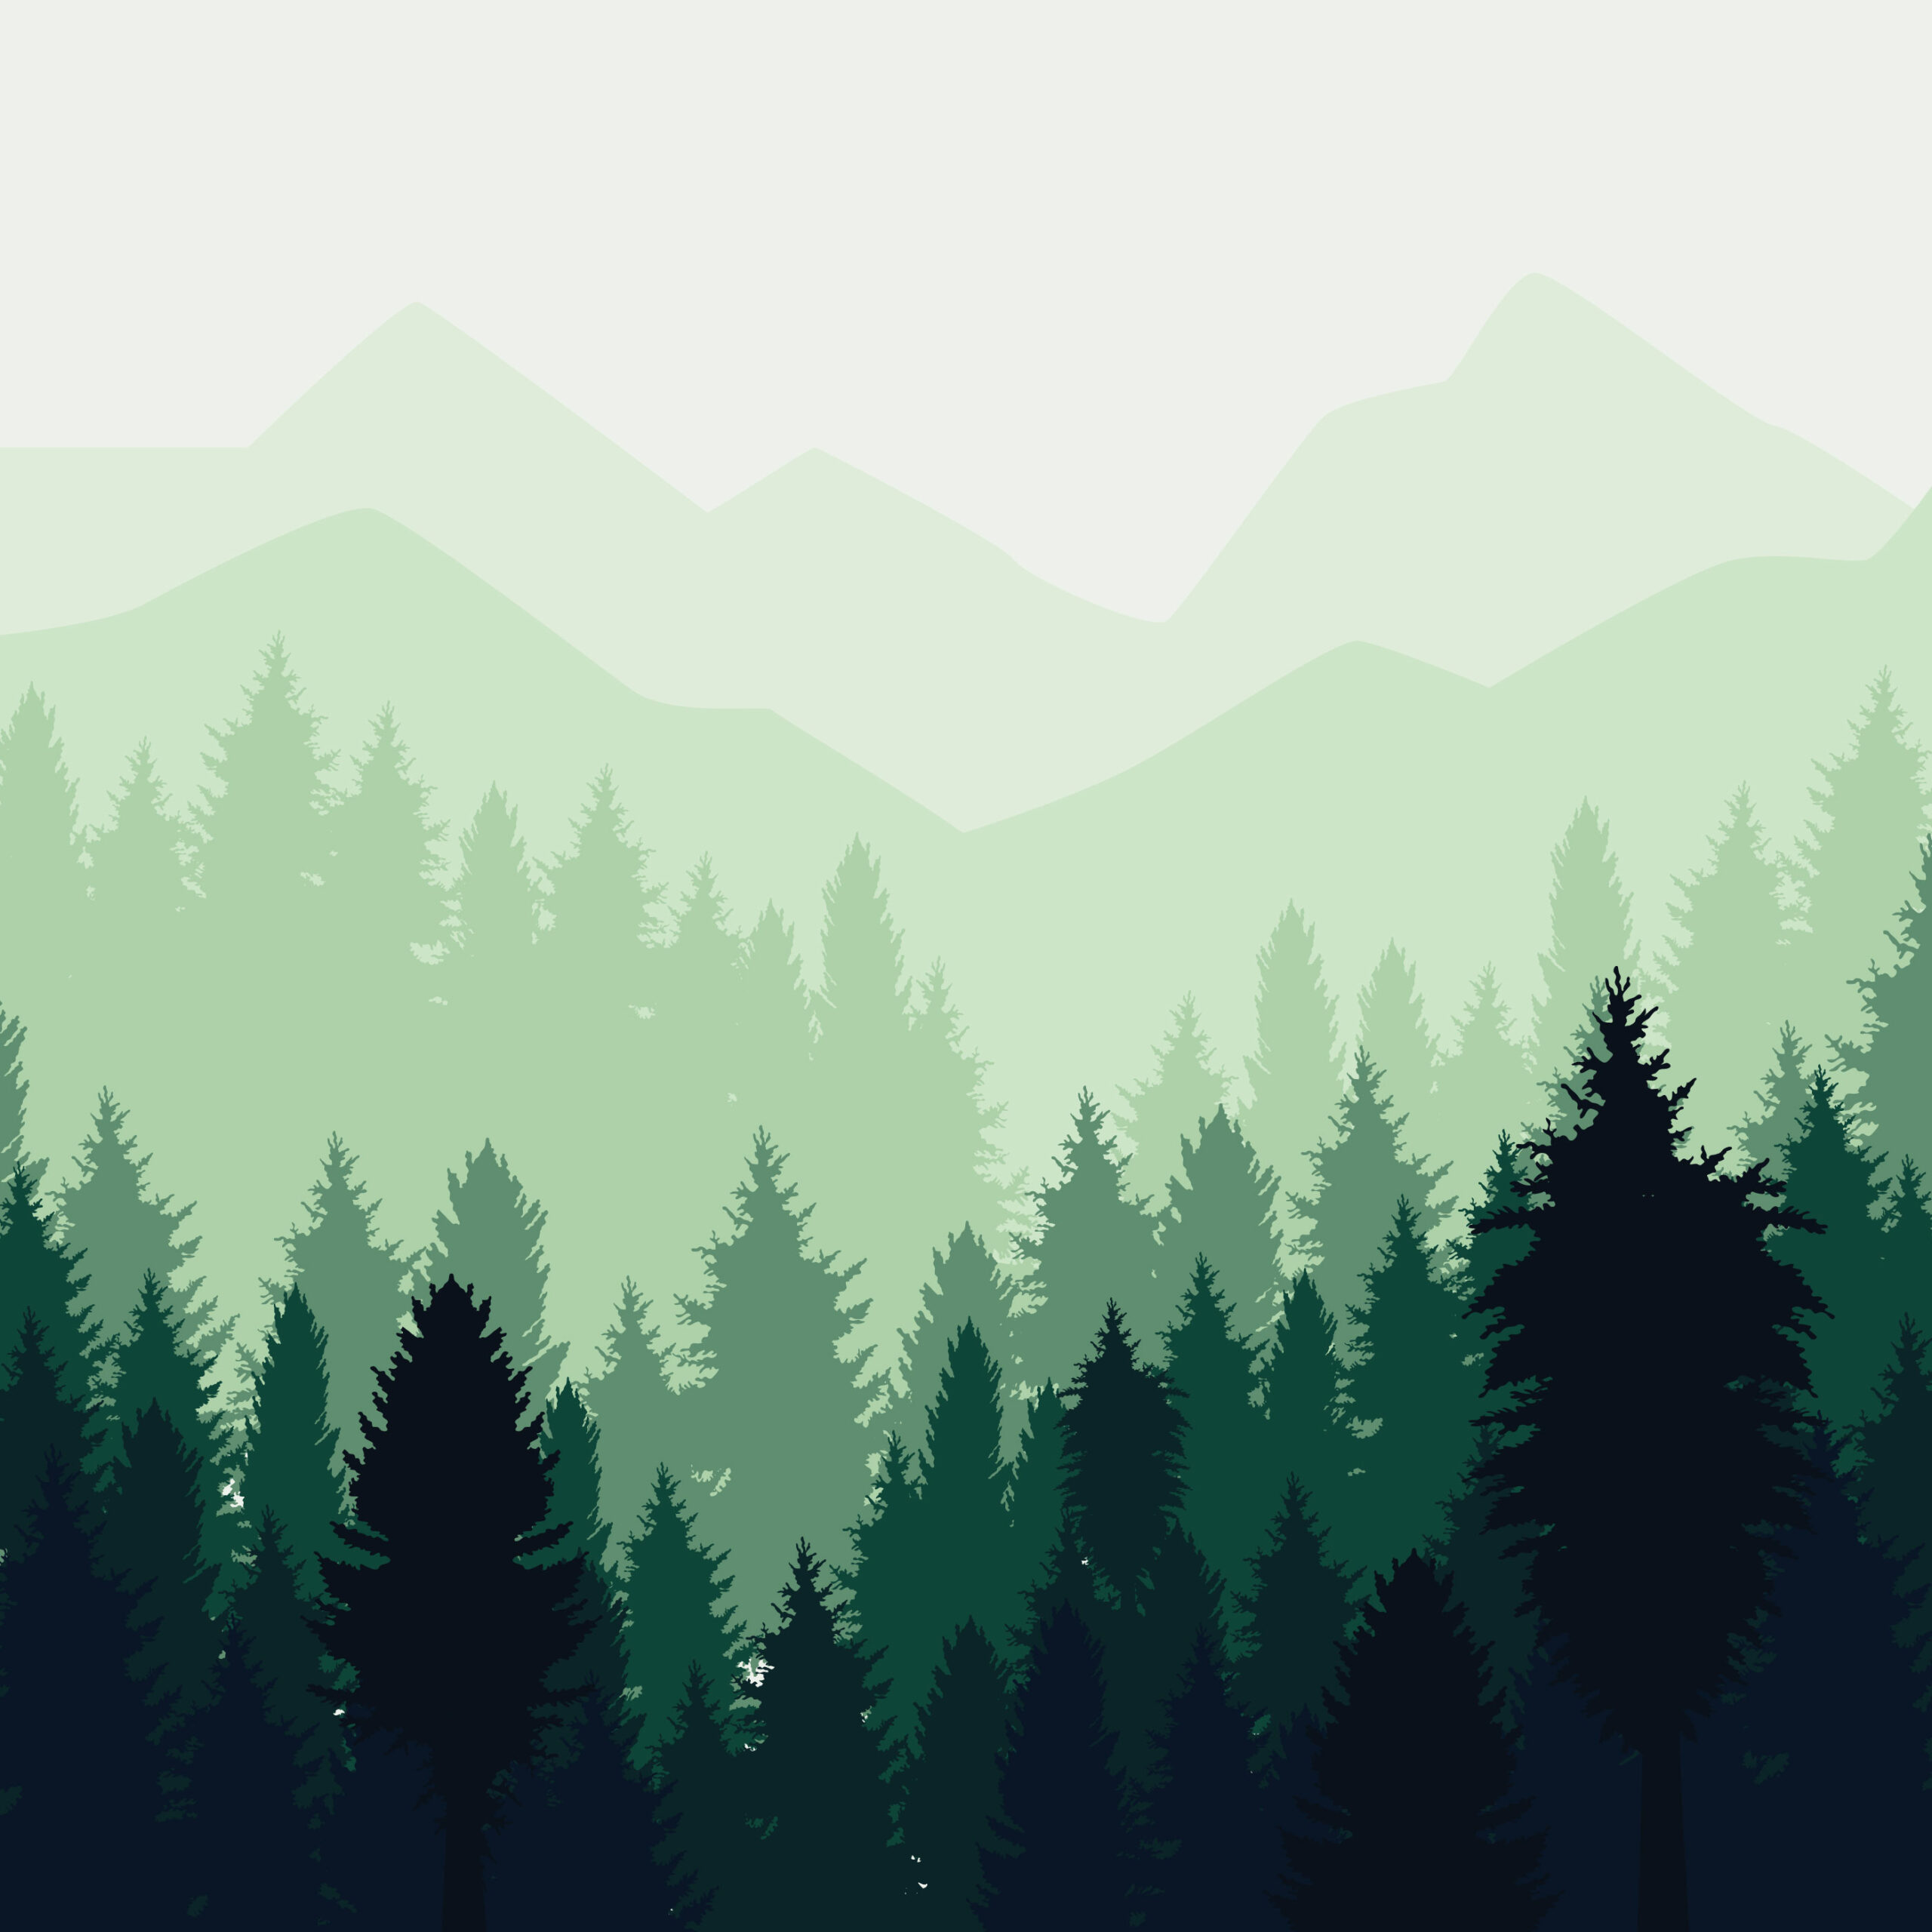 Forest Silhouette Free Vector Art - (3,030 Free Downloads)